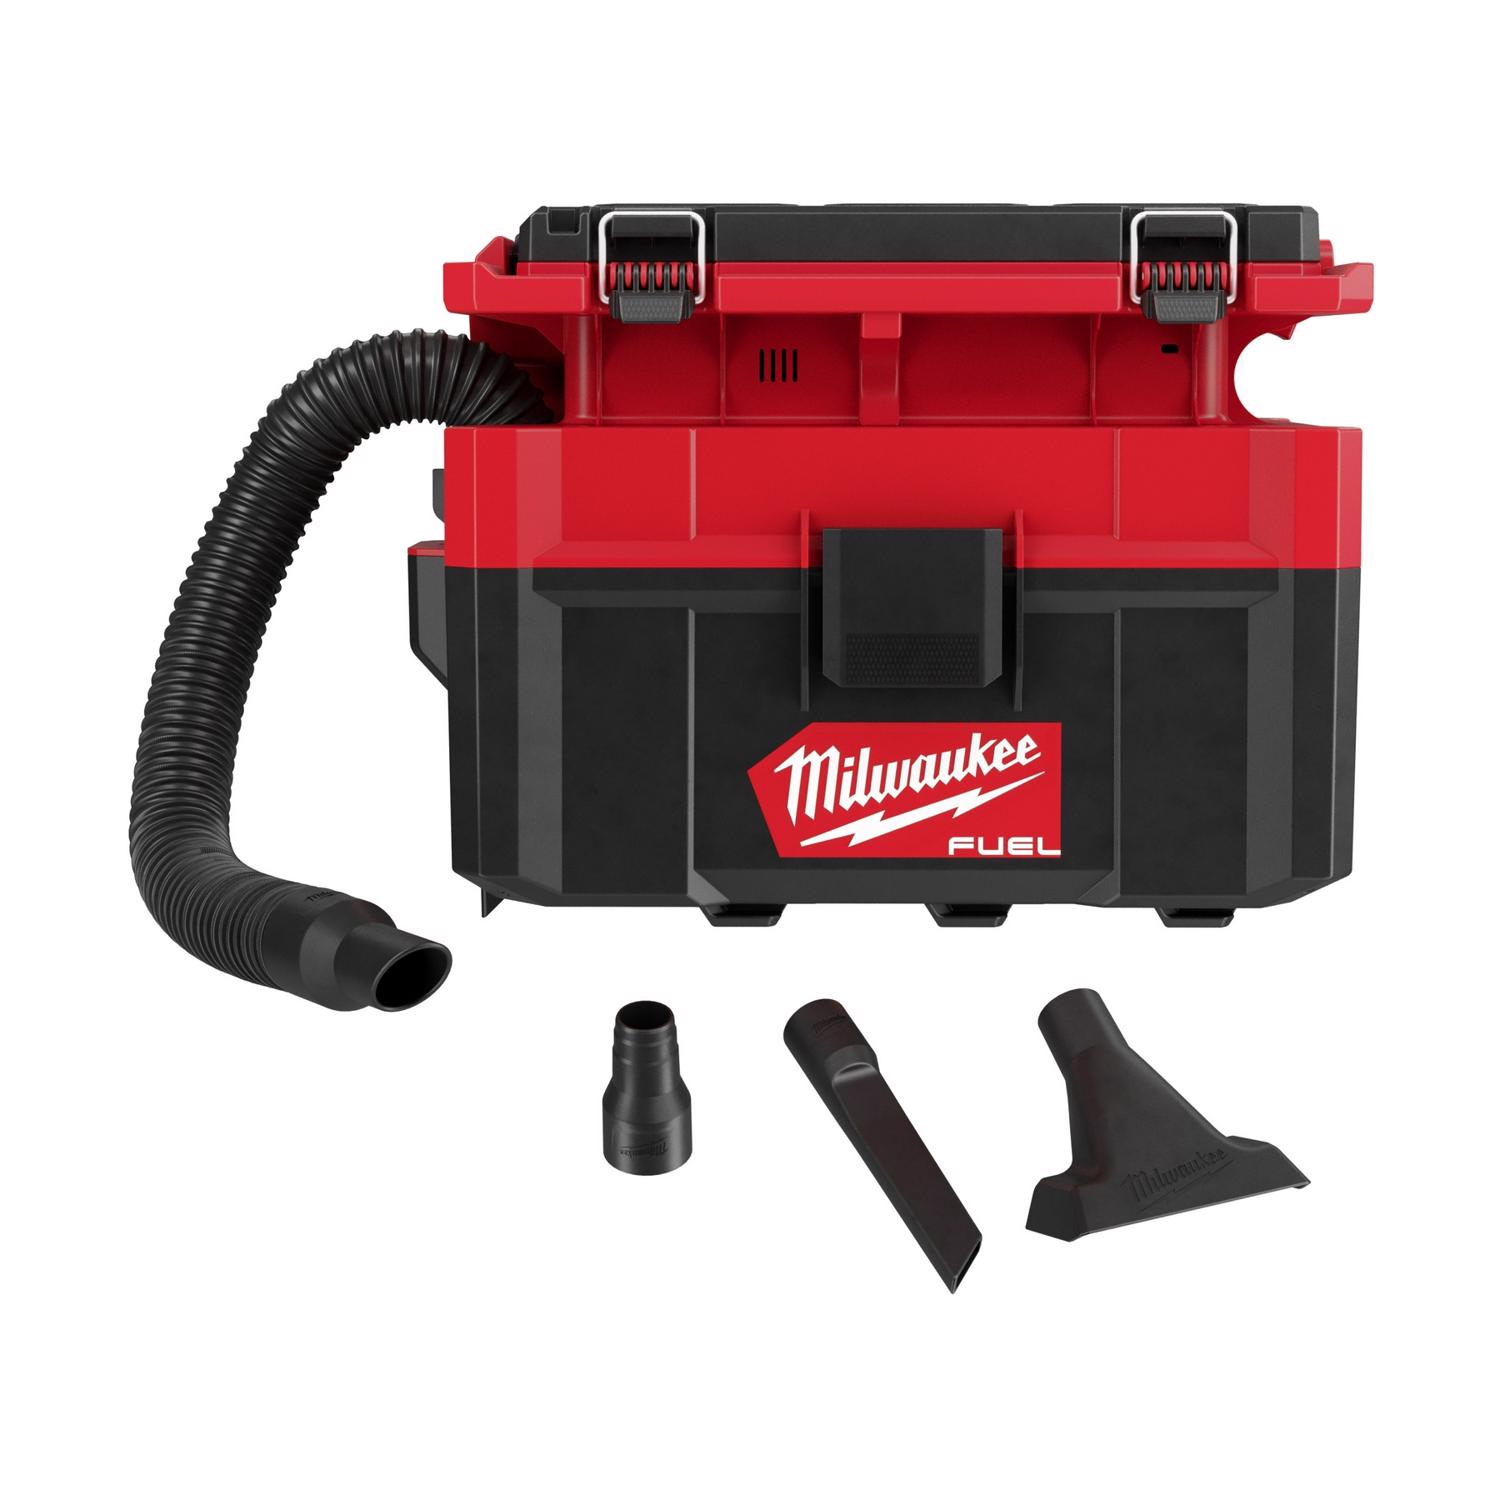 Photos - Baby Hygiene Milwaukee M18 FUEL PACKOUT 0970-20 2.5 gal Cordless Wet/Dry Vacuum Tool On 